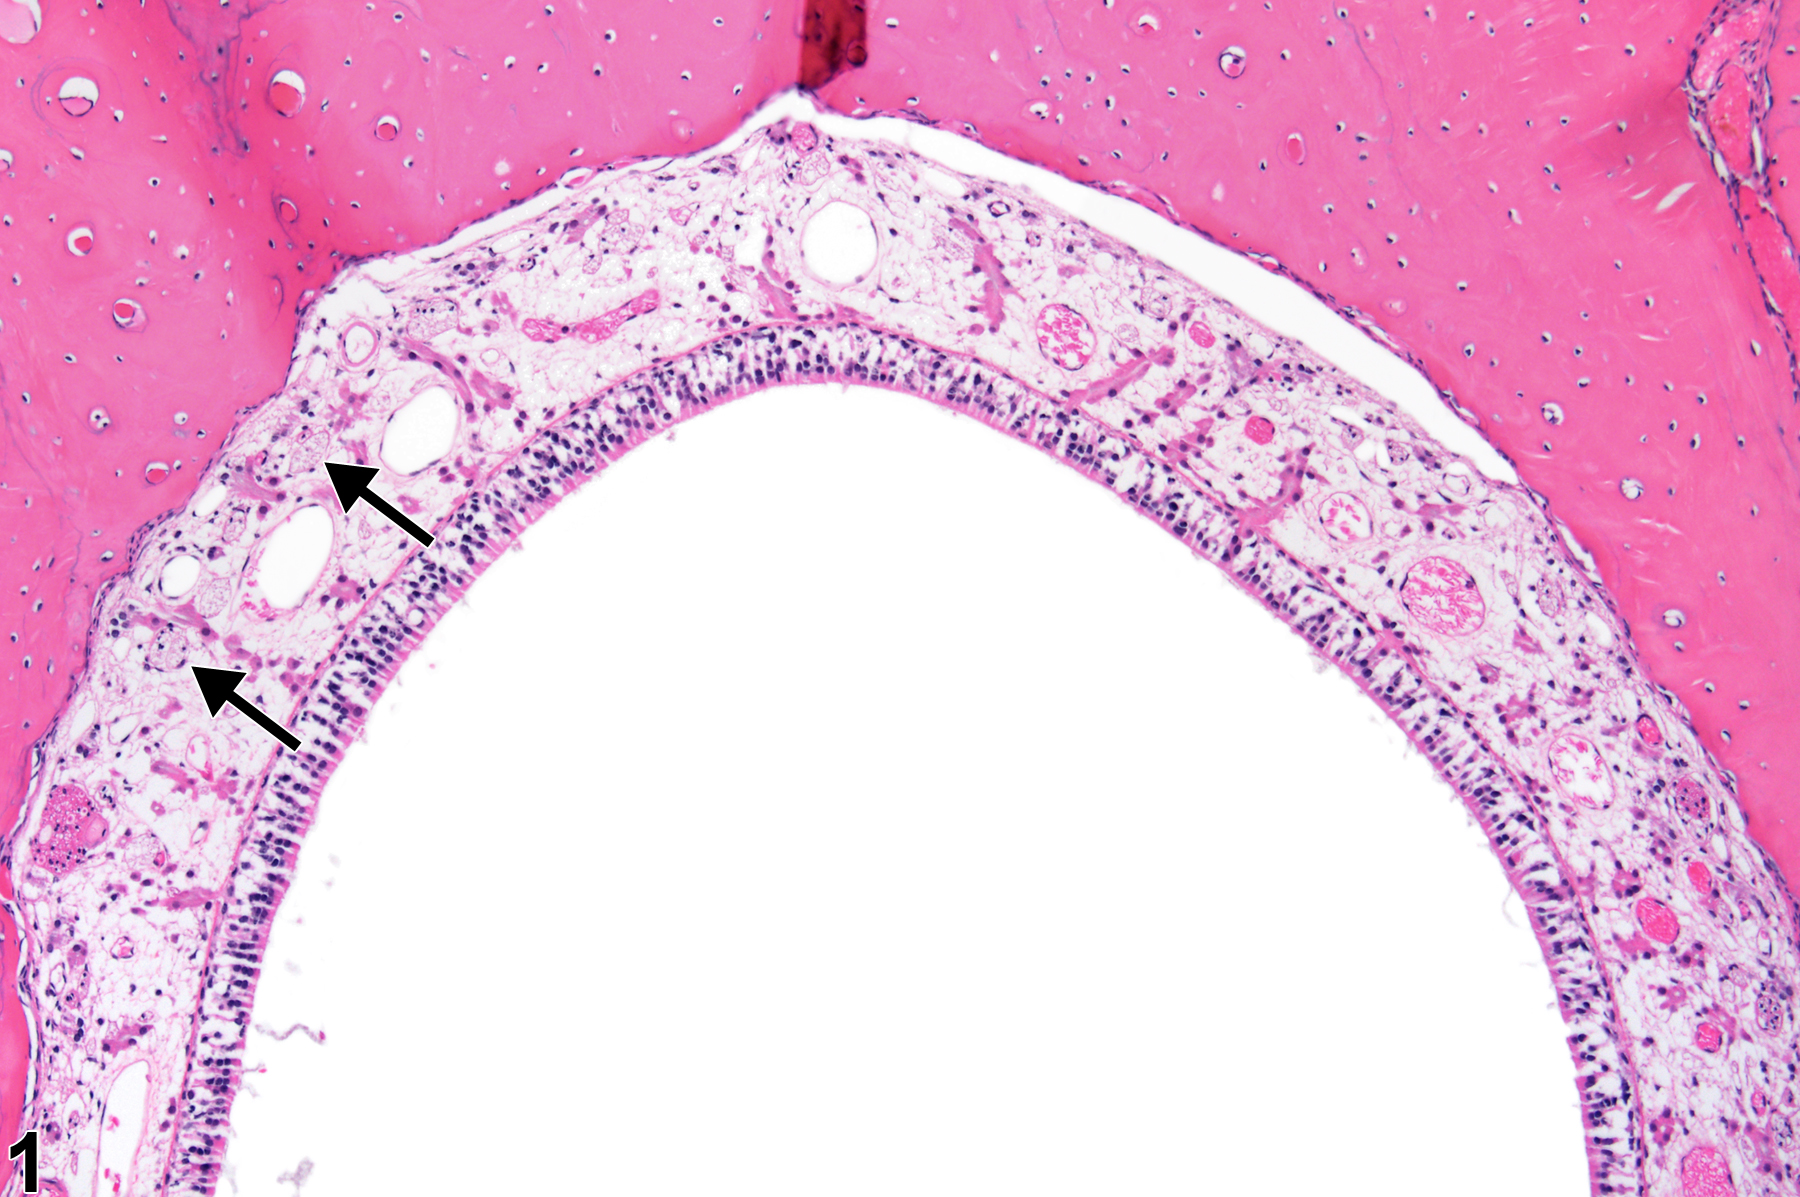 Image of atrophy in the nose, nerve from a female F344/N rat in a subchronic study